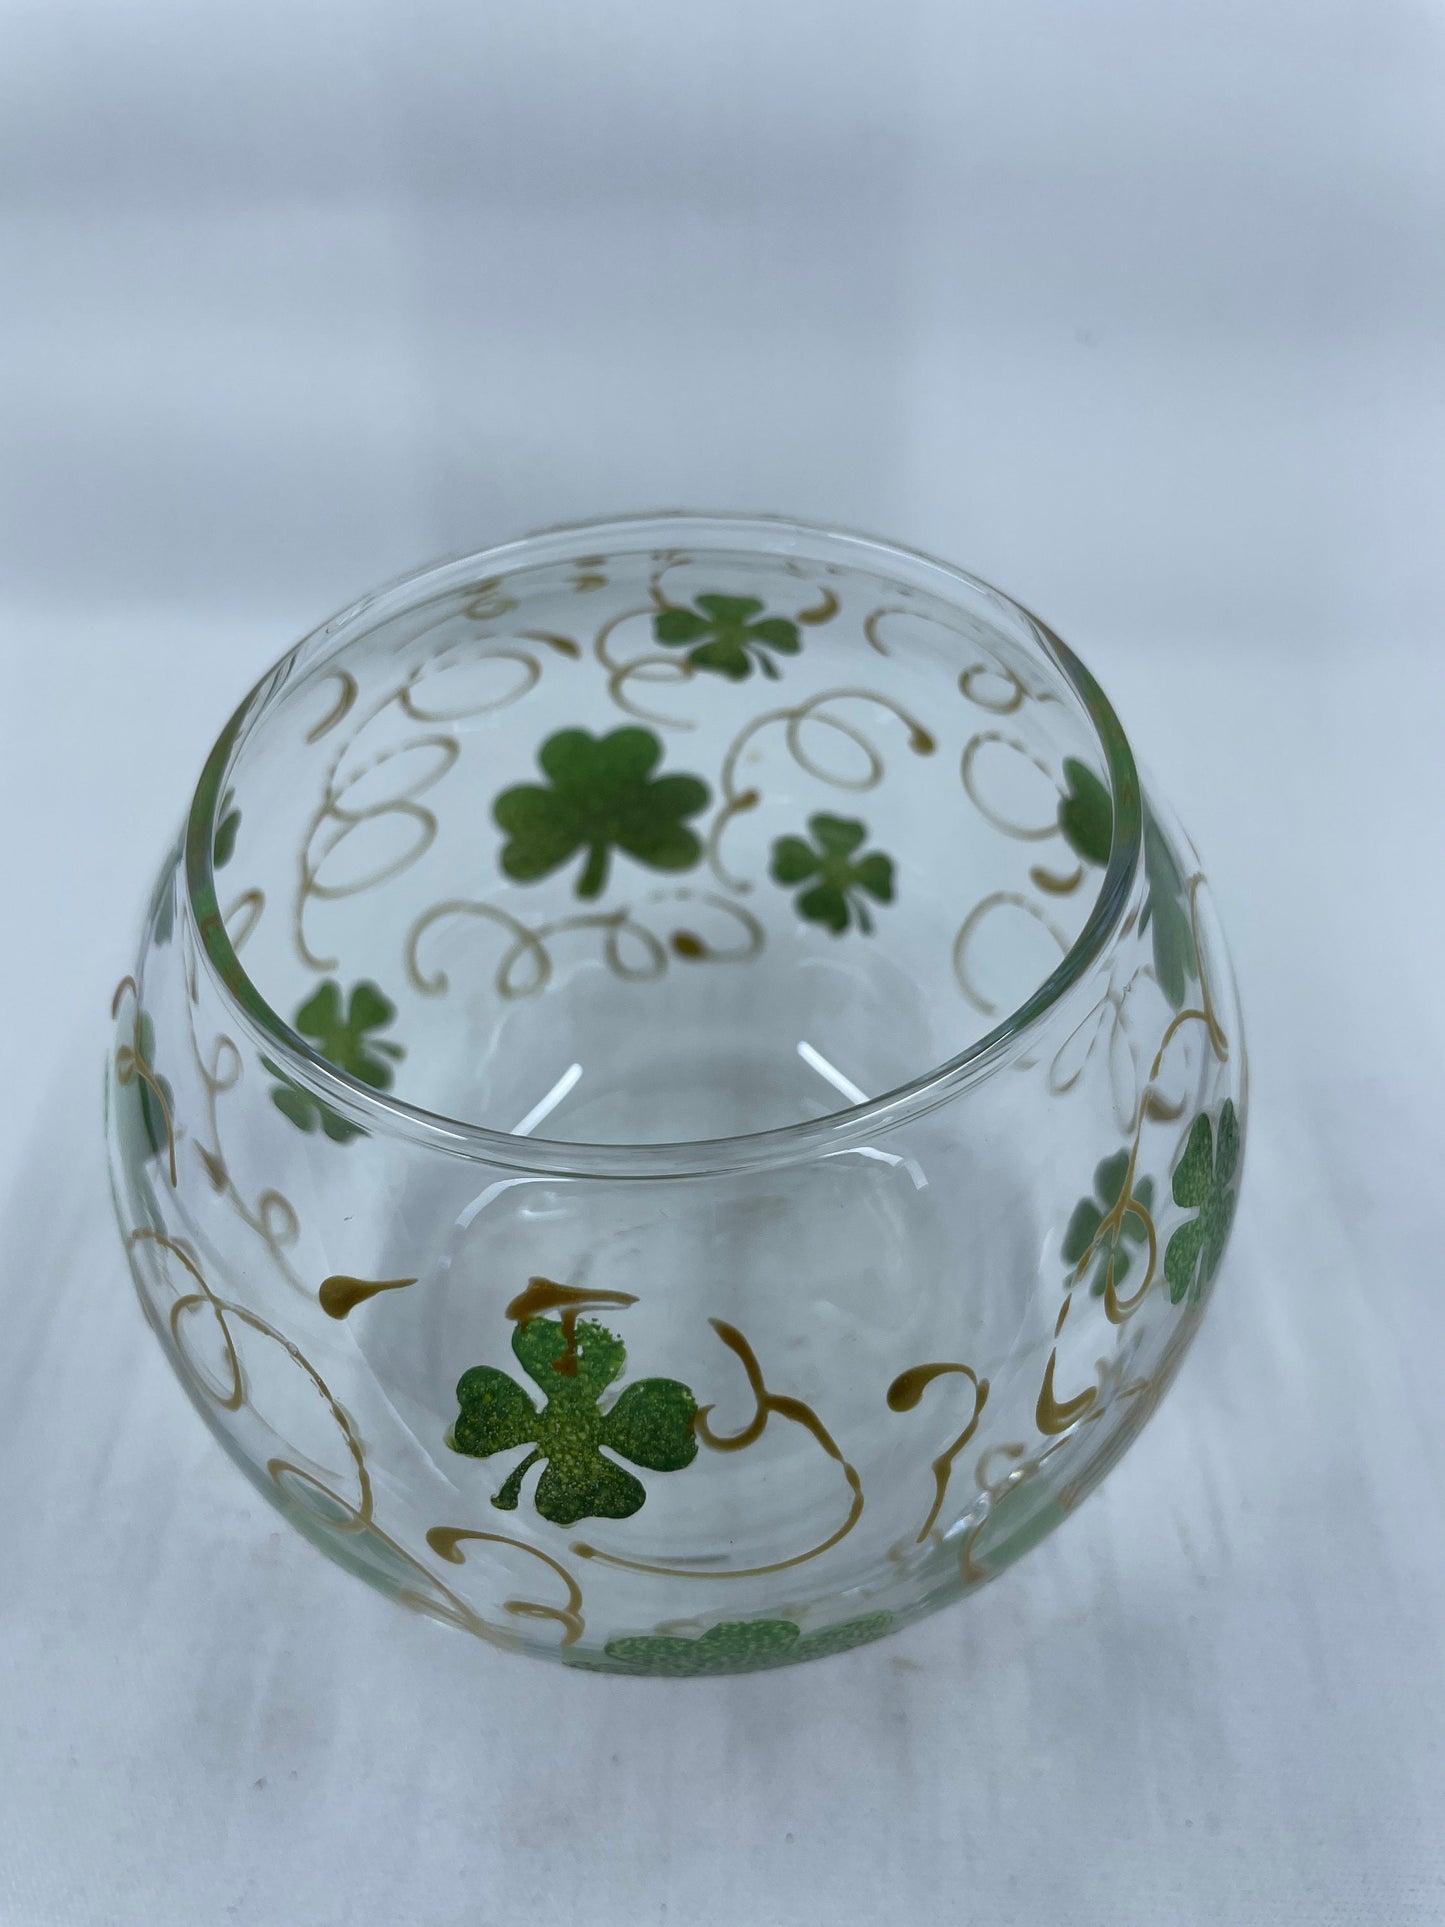 Hand Painted Round Candleholder for St. Patrick’s Day with clover